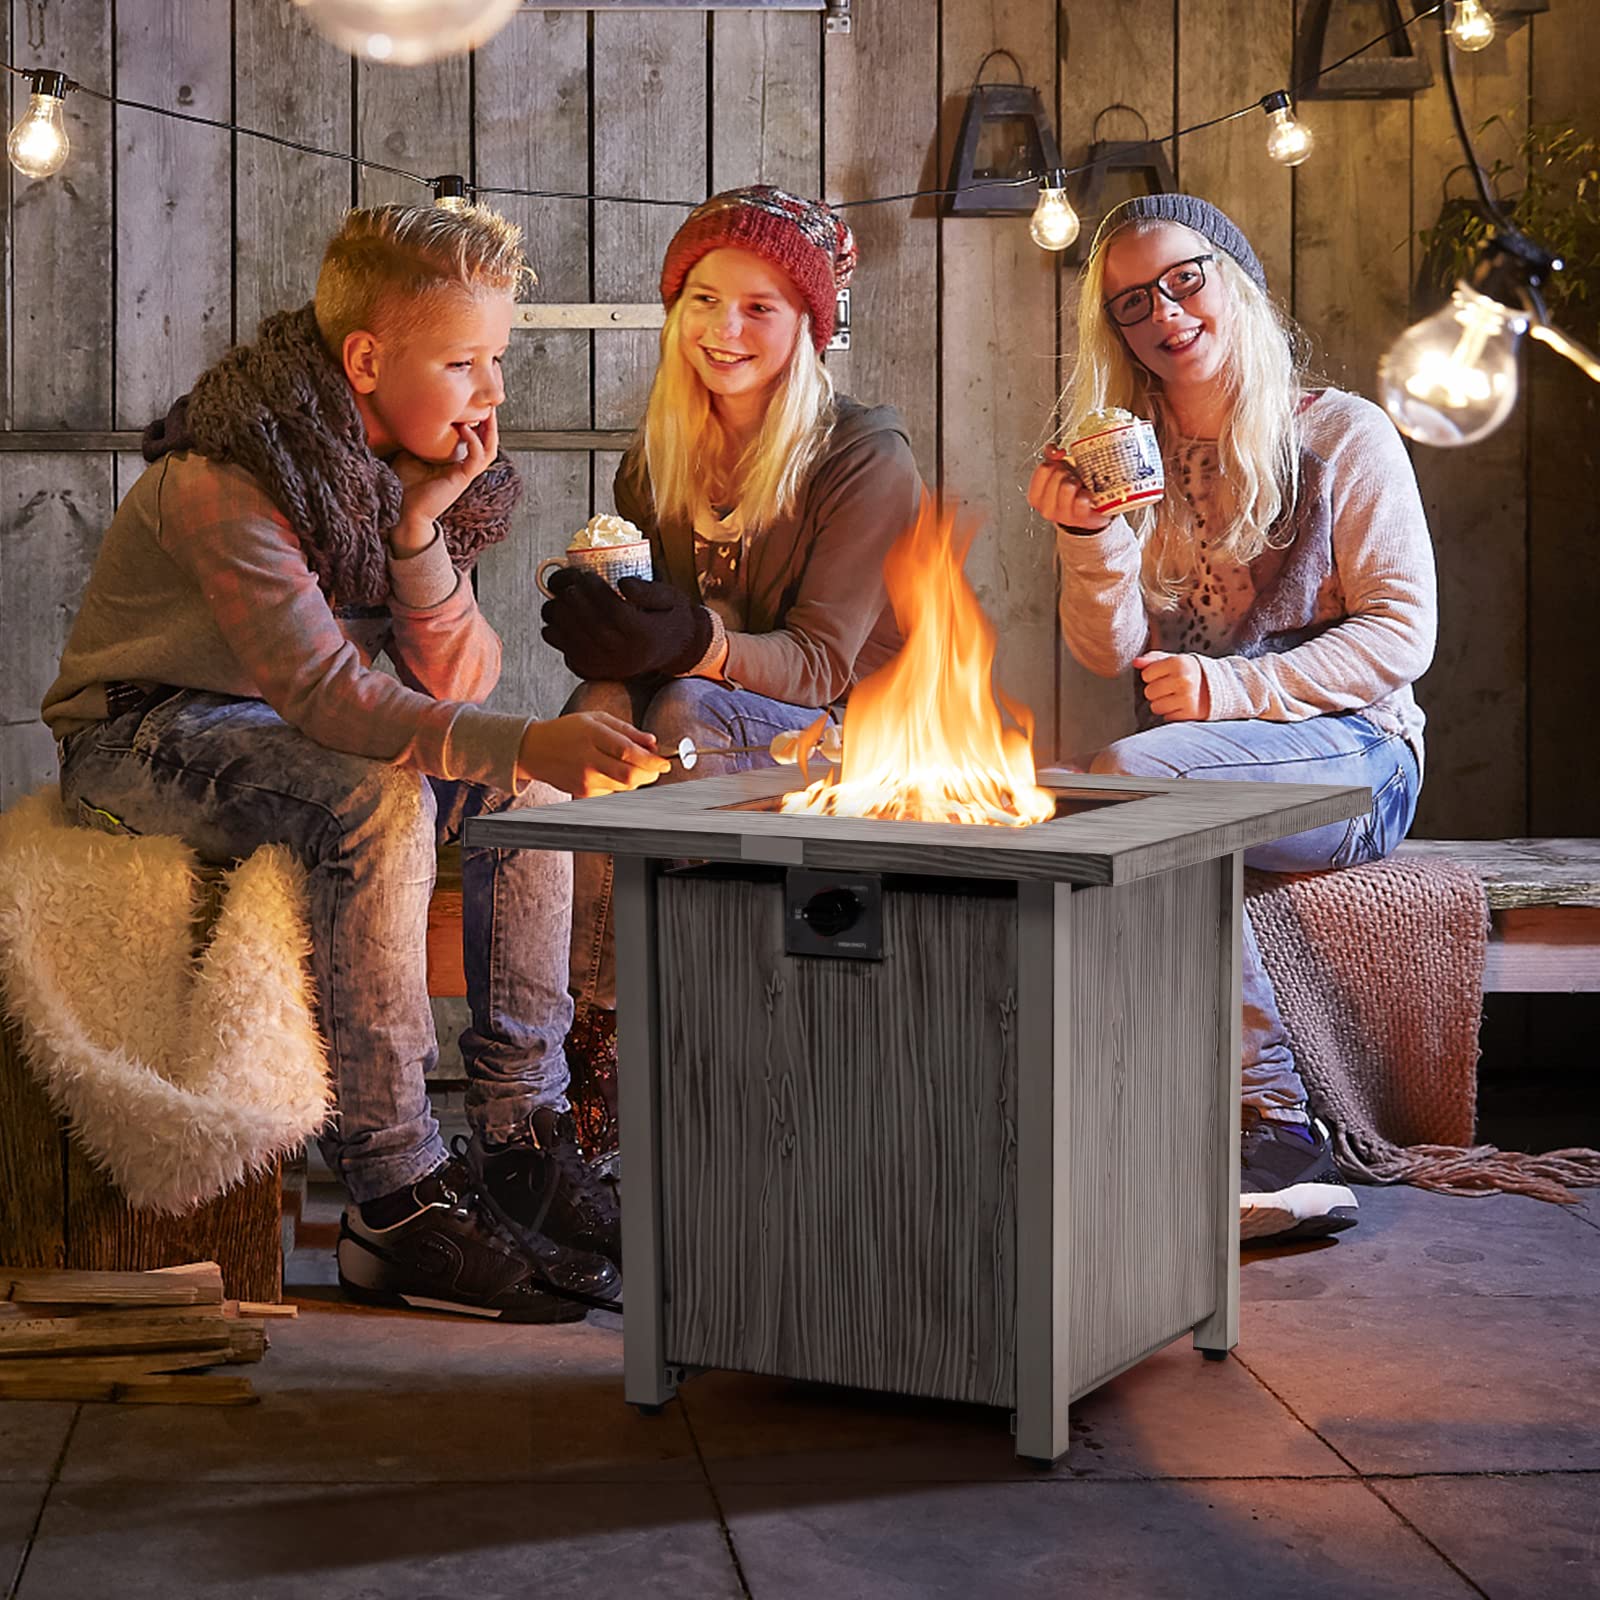 HAPPYGRILL 28” Propane Fire Pit Table, 40,000 BTU Outdoor Propane Gas Fire Table with Wood-Like Tabletop, Lid and Lava Rocks, Square Auto-Ignition Propane Firepit with PVC Cover